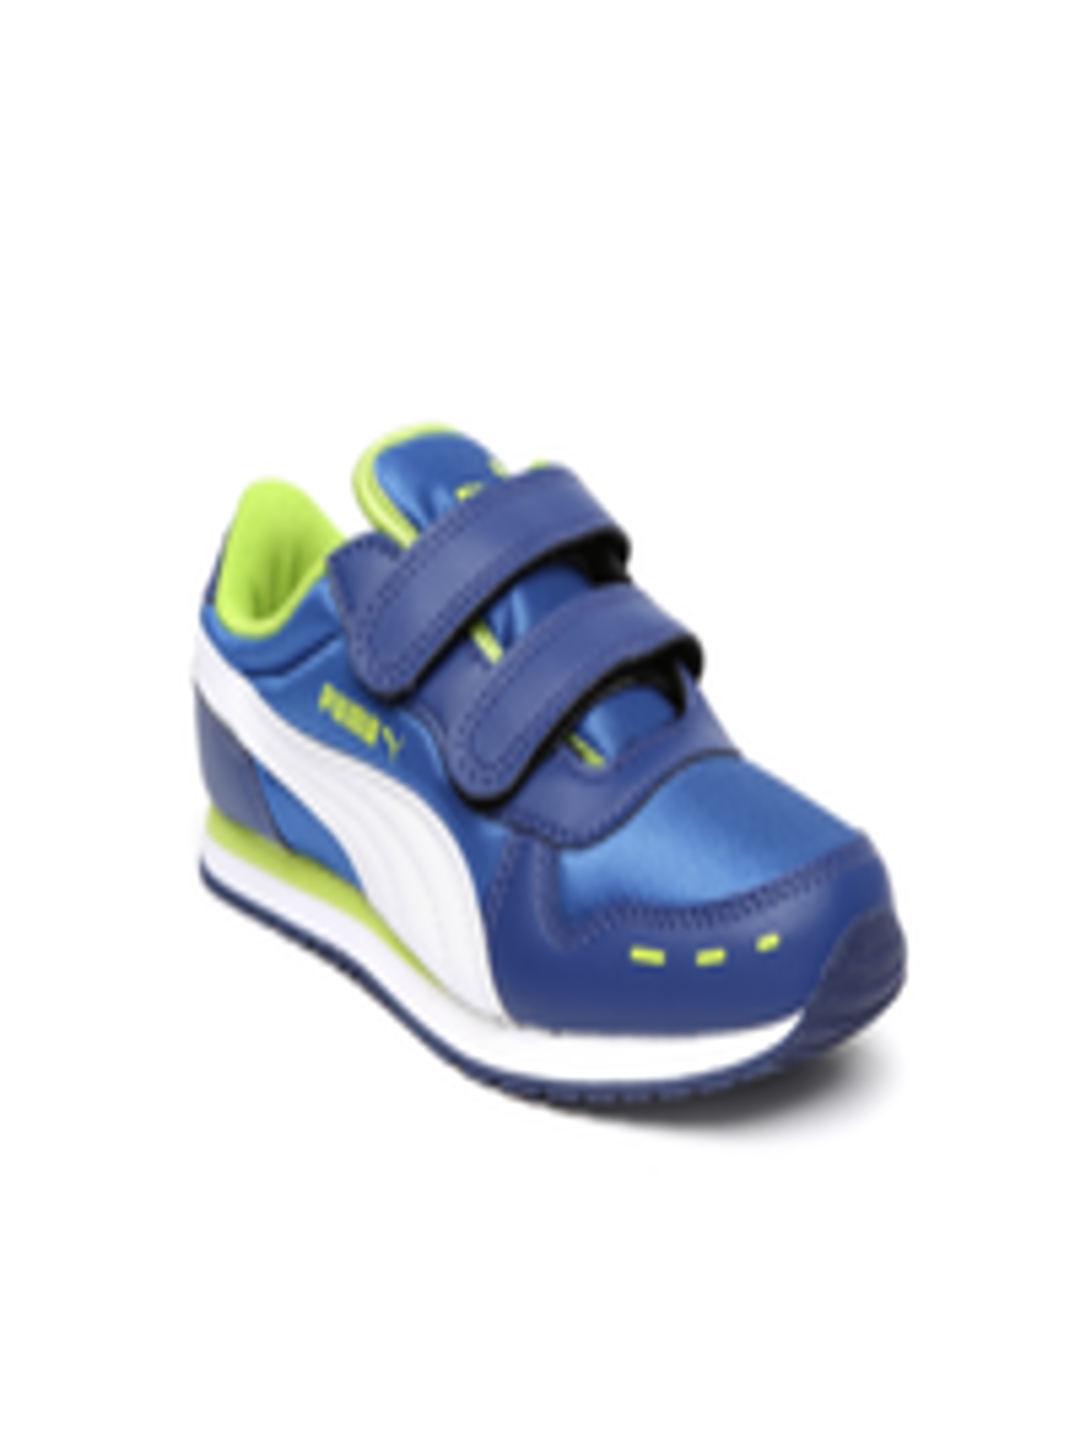 Buy PUMA Kids Blue Cabana Racer Sneakers - Casual Shoes for Unisex Kids ...